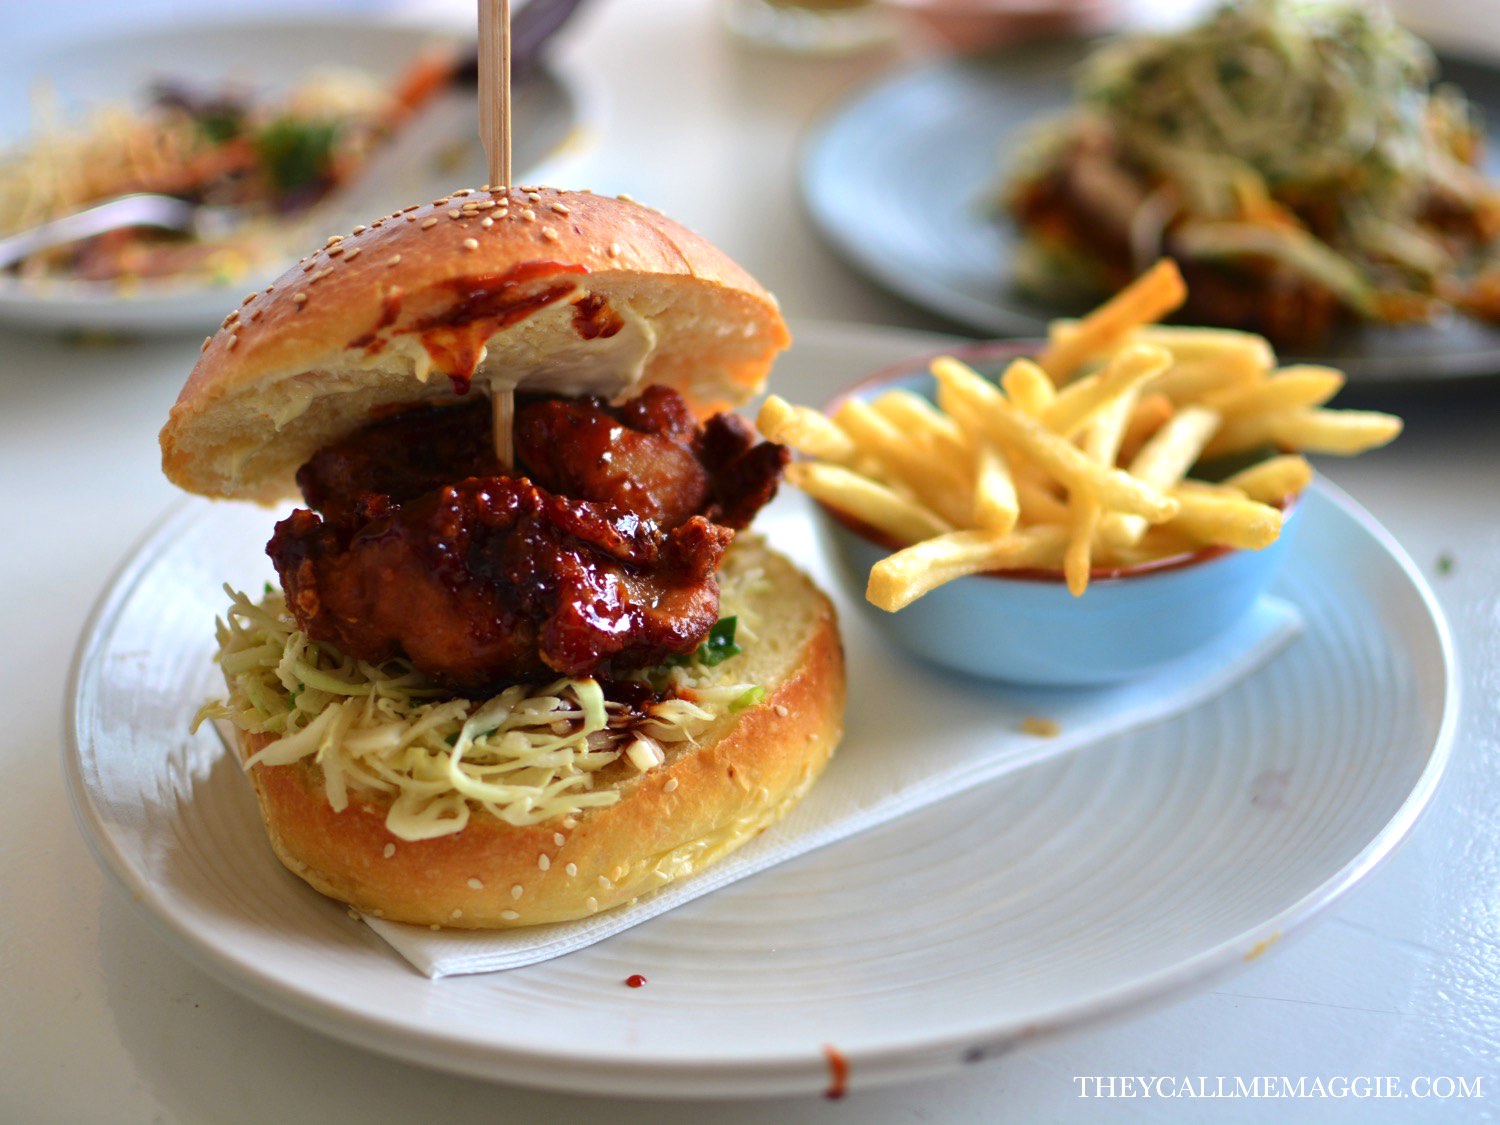  Korean fried chicken burger - with kimchi slaw, served with fries.&nbsp; 